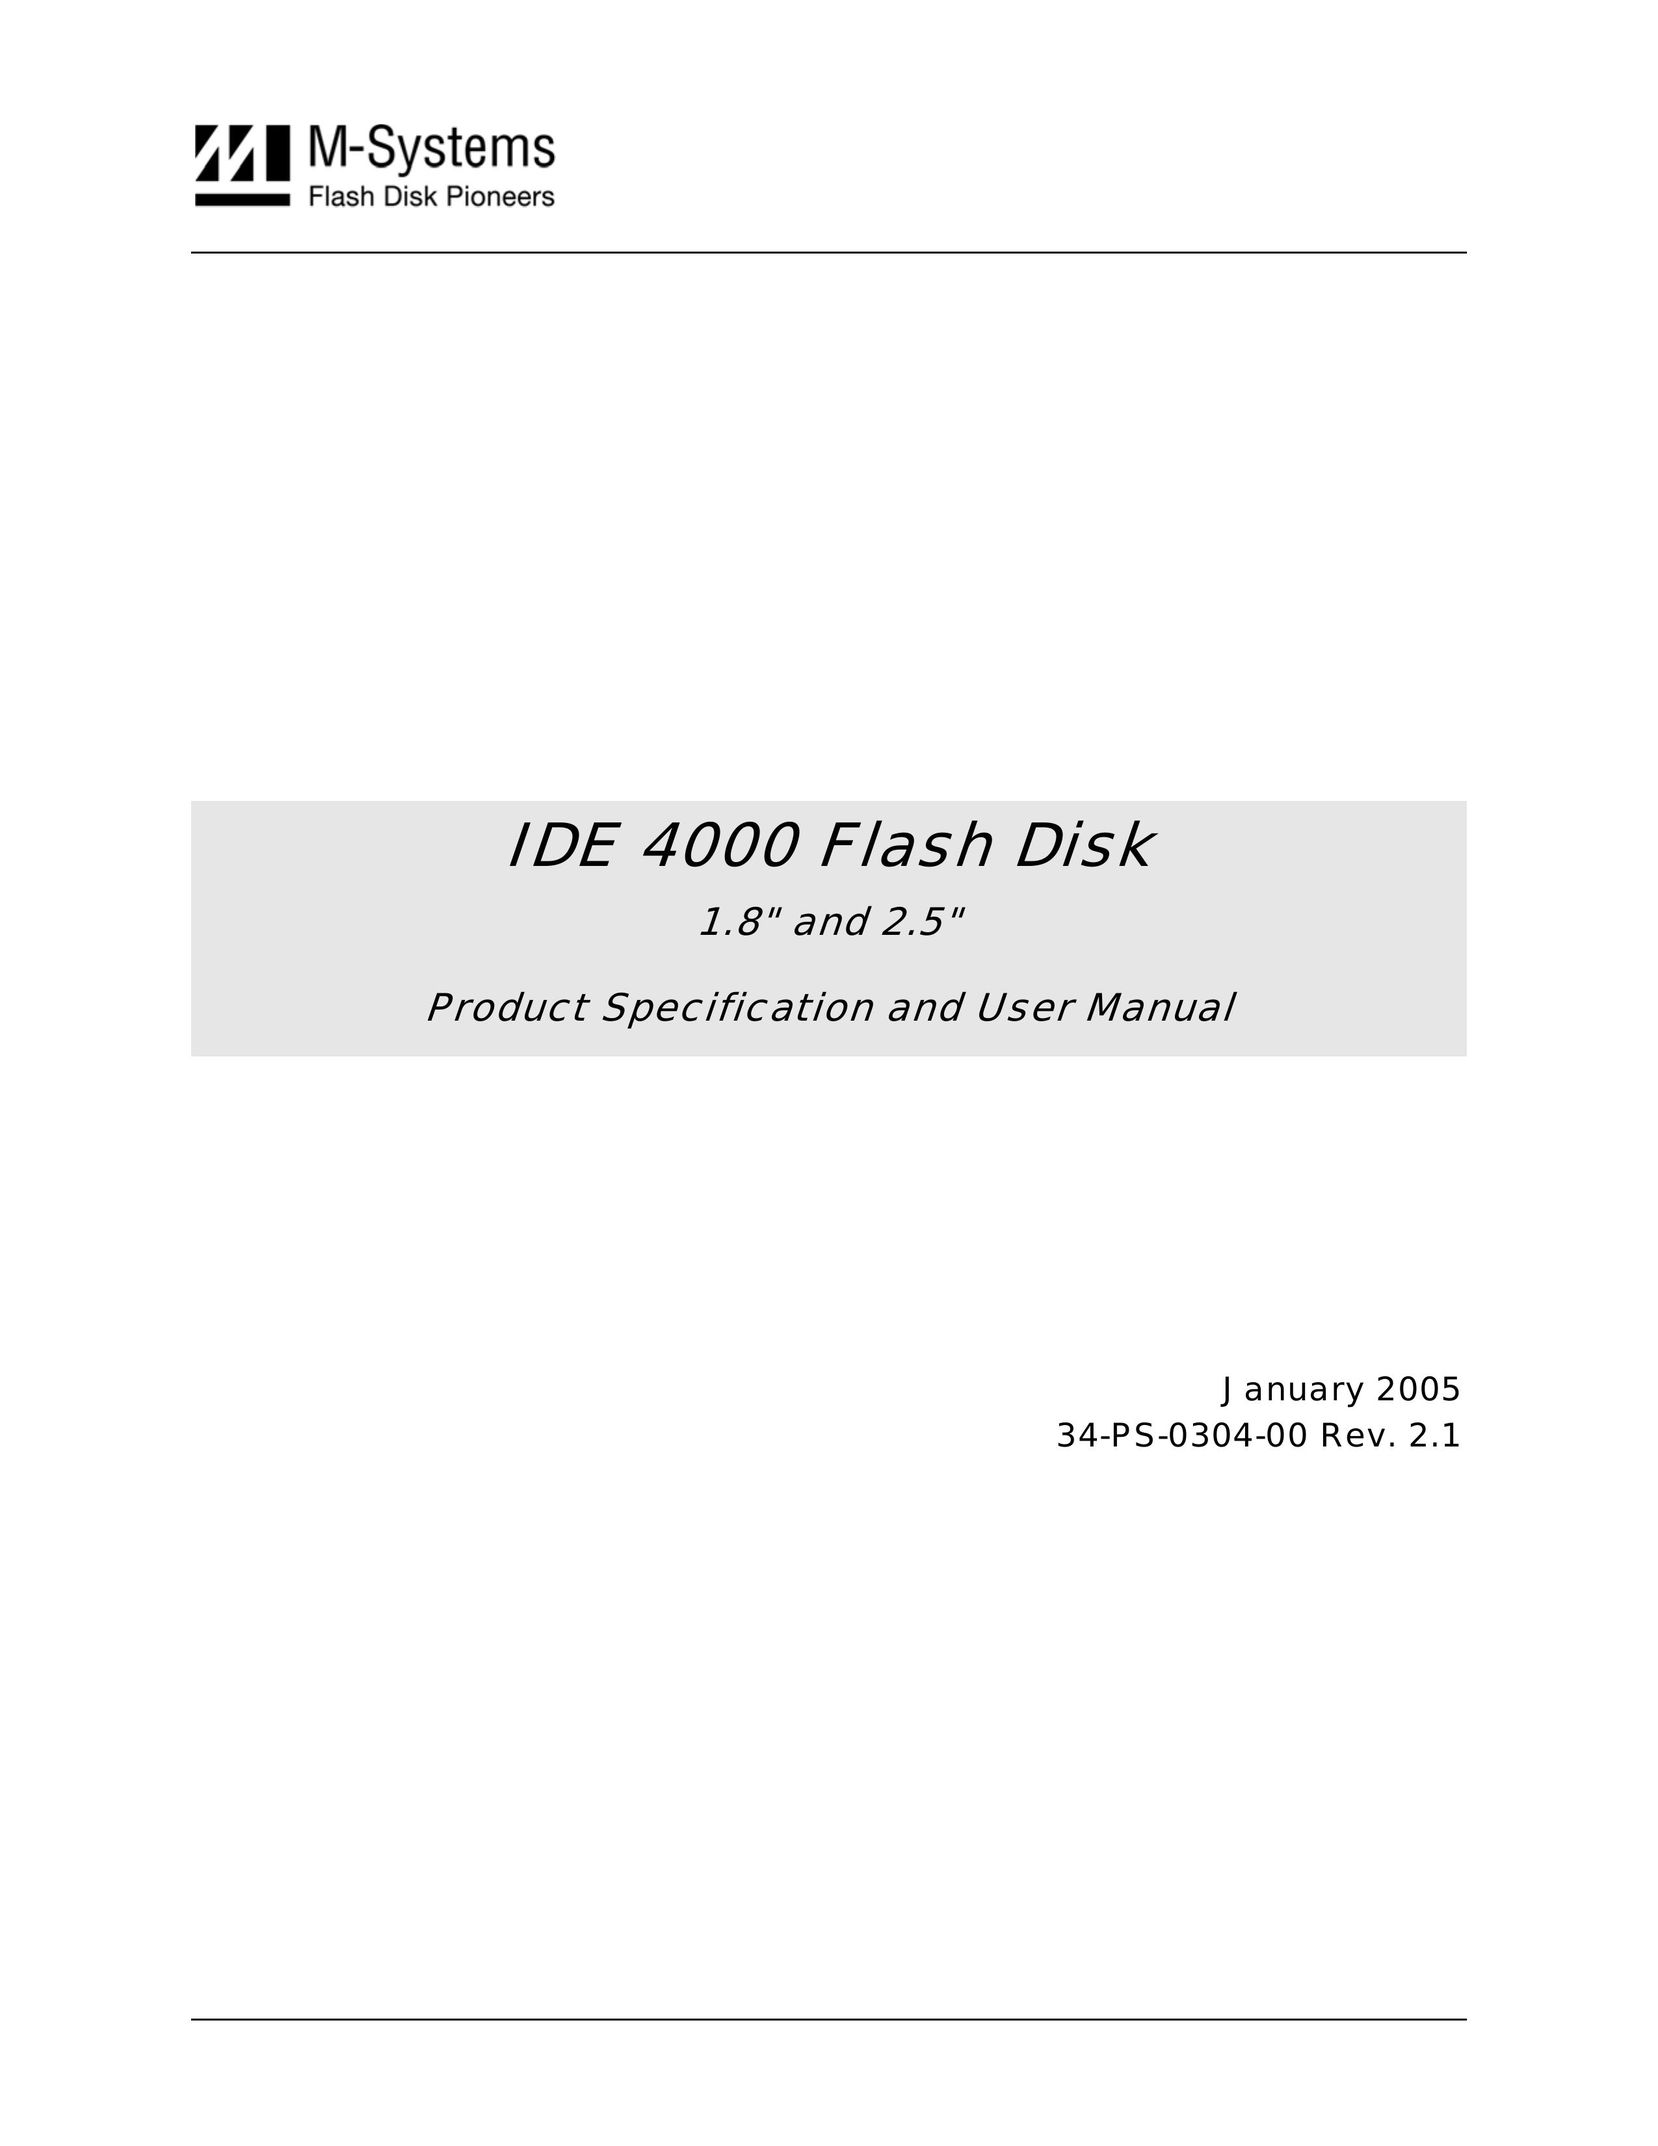 M-Systems Flash Disk Pioneers IDE 4000 Flash Memory User Manual